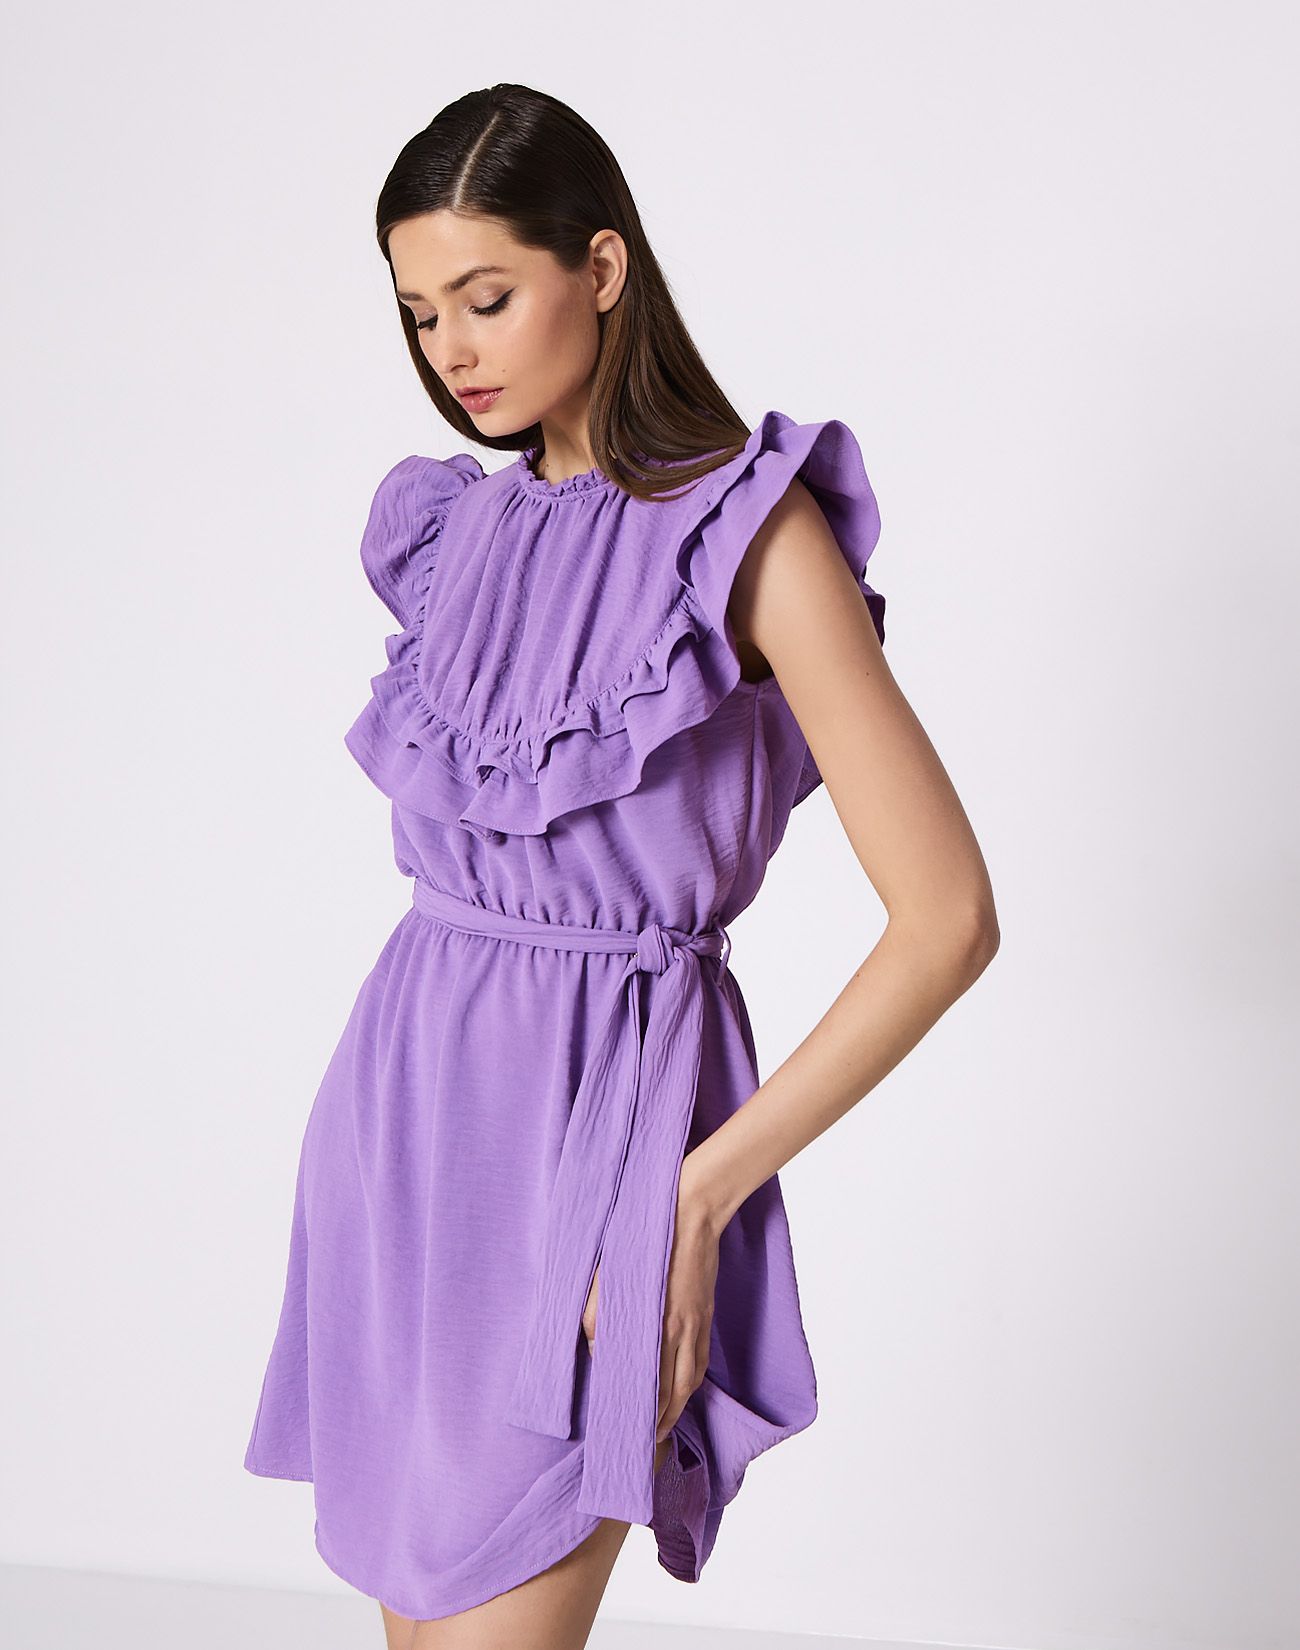 Dress with double ruffles